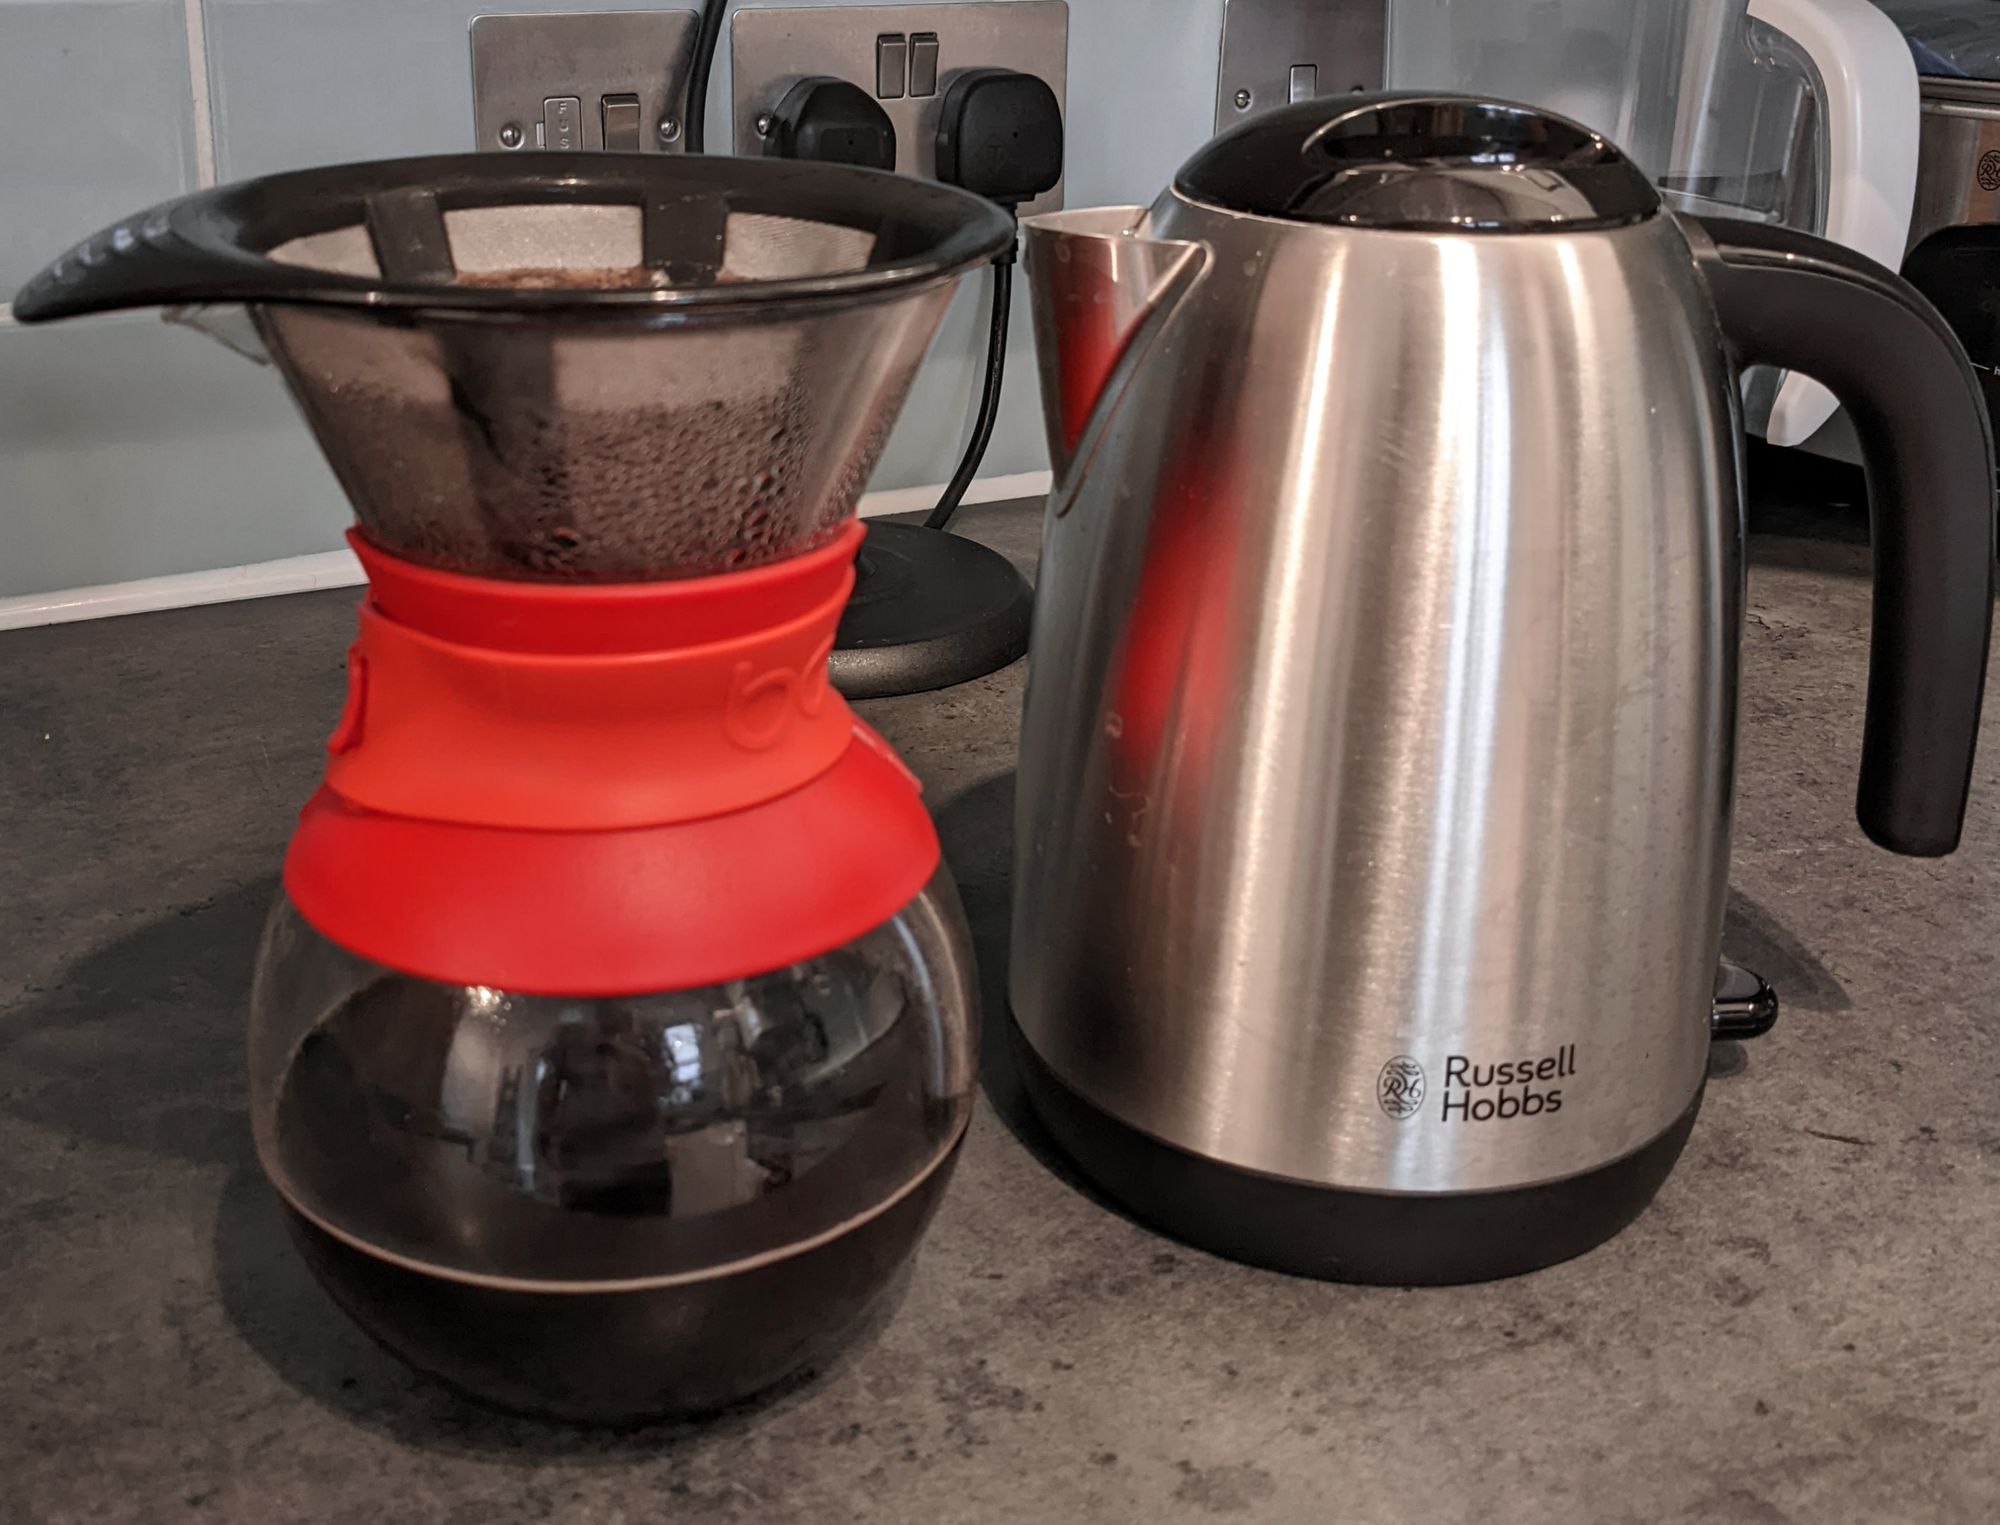 A Bodum pour over coffee maker with a red band next to a Russell Hobbs stainless steel kettle.